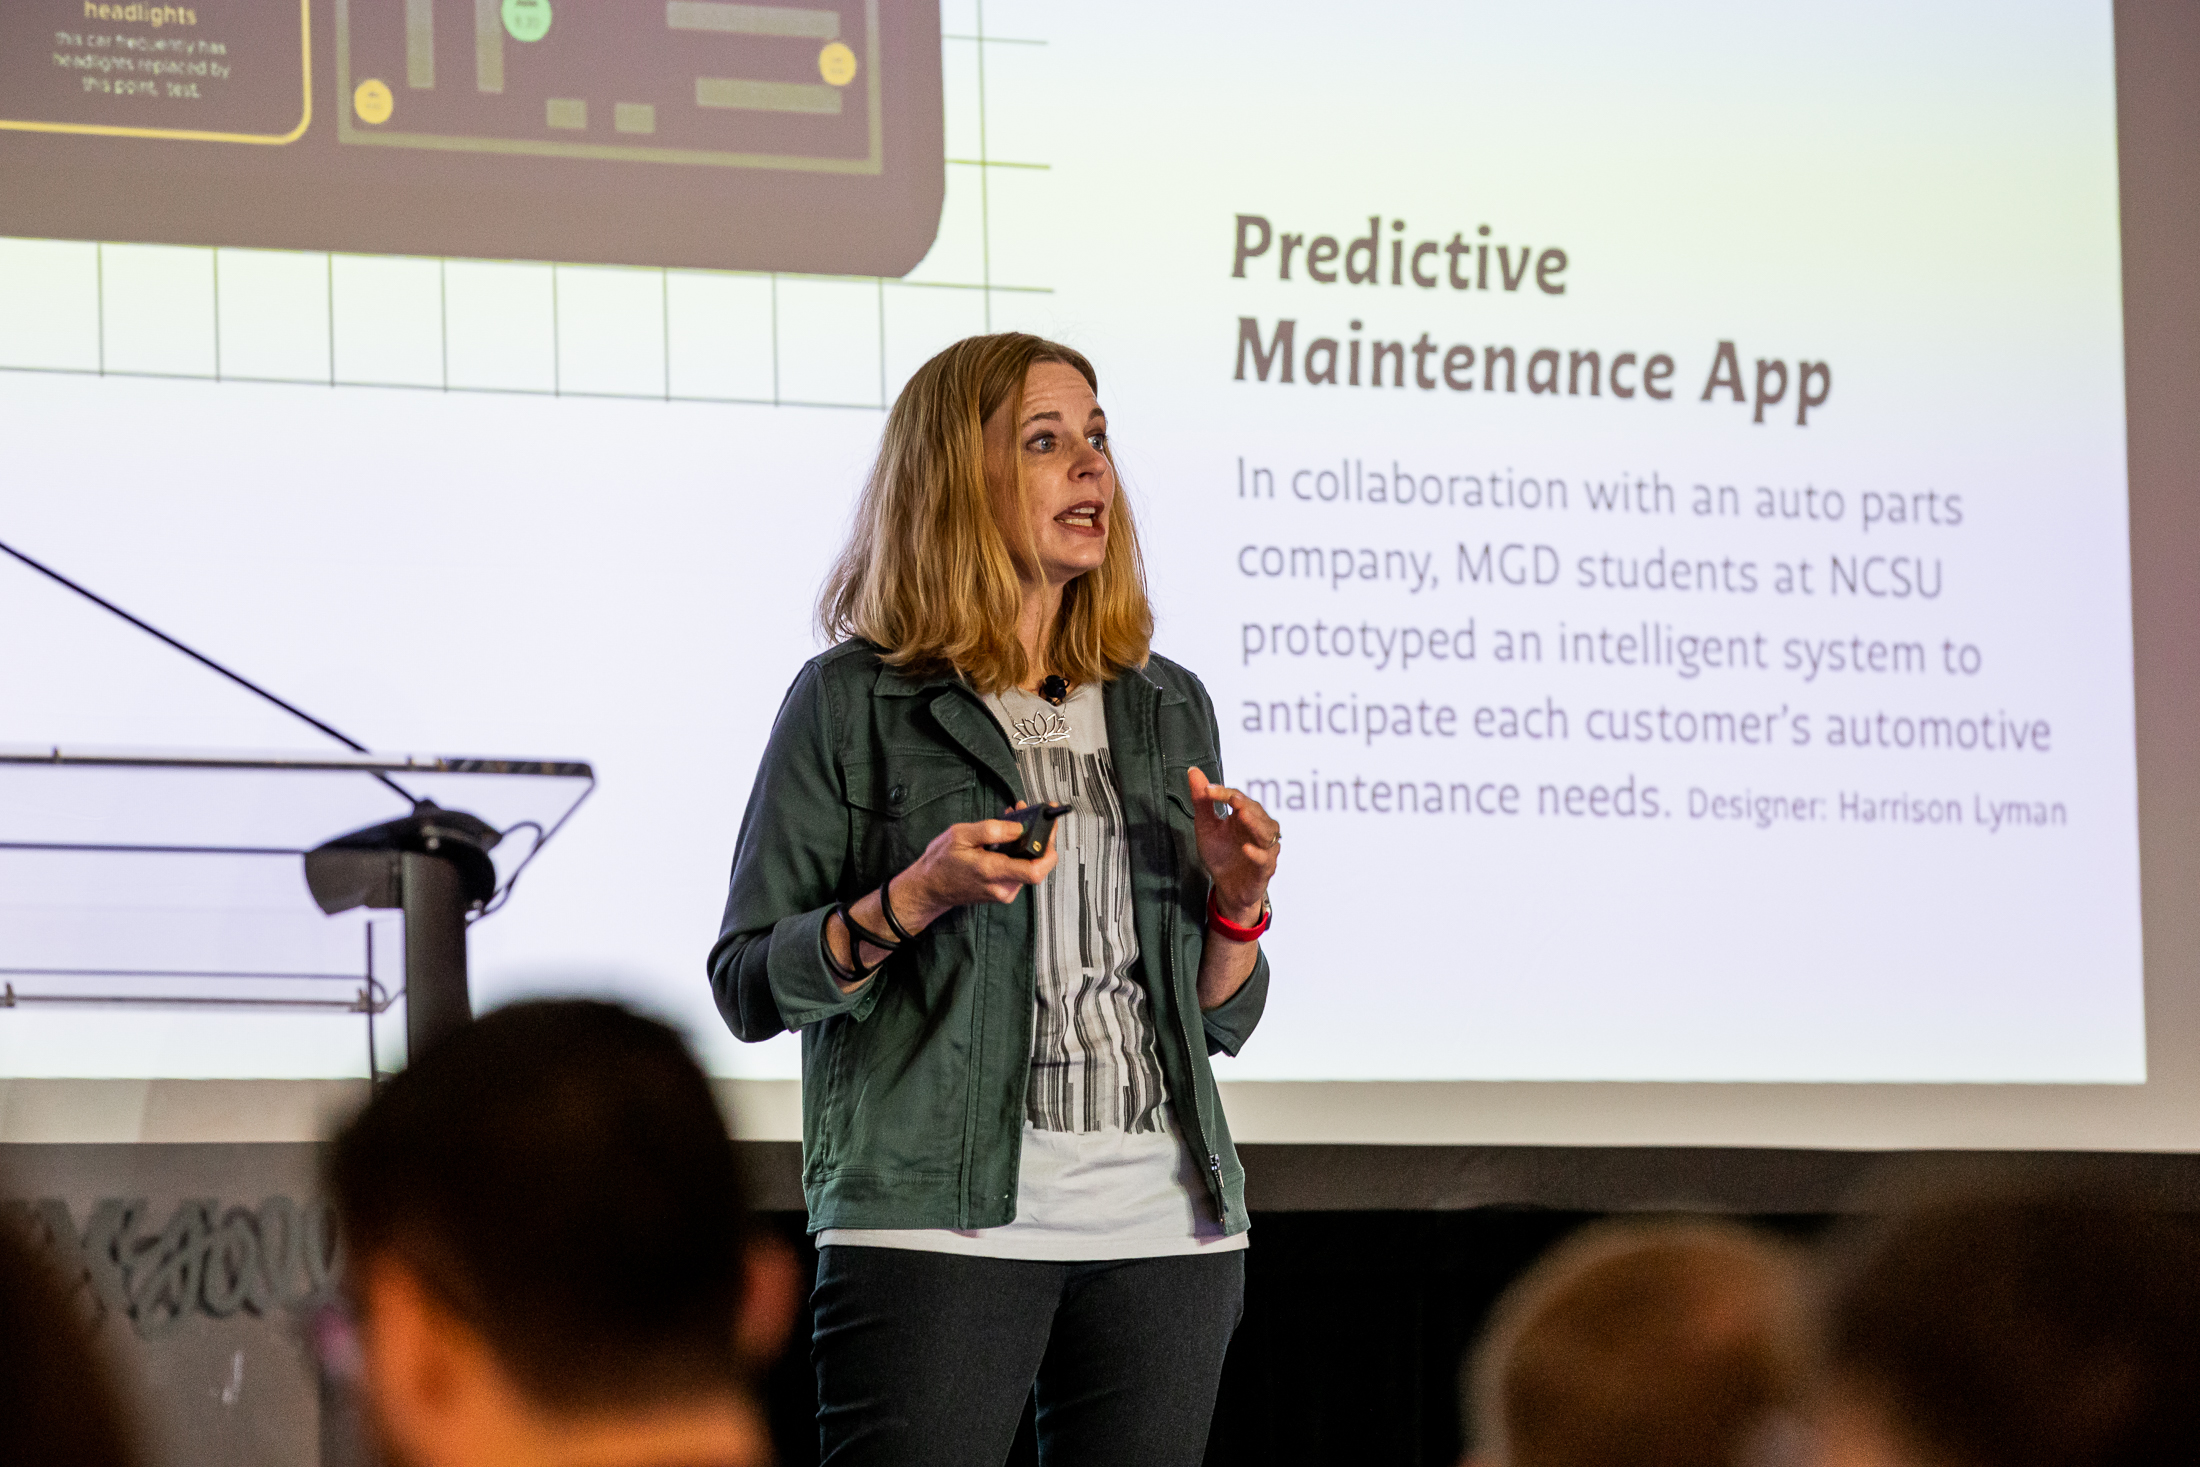 white women with blonde hair on stage. She is speaking in front of a large screen. Screen reads: "Predictive Maintenance App"